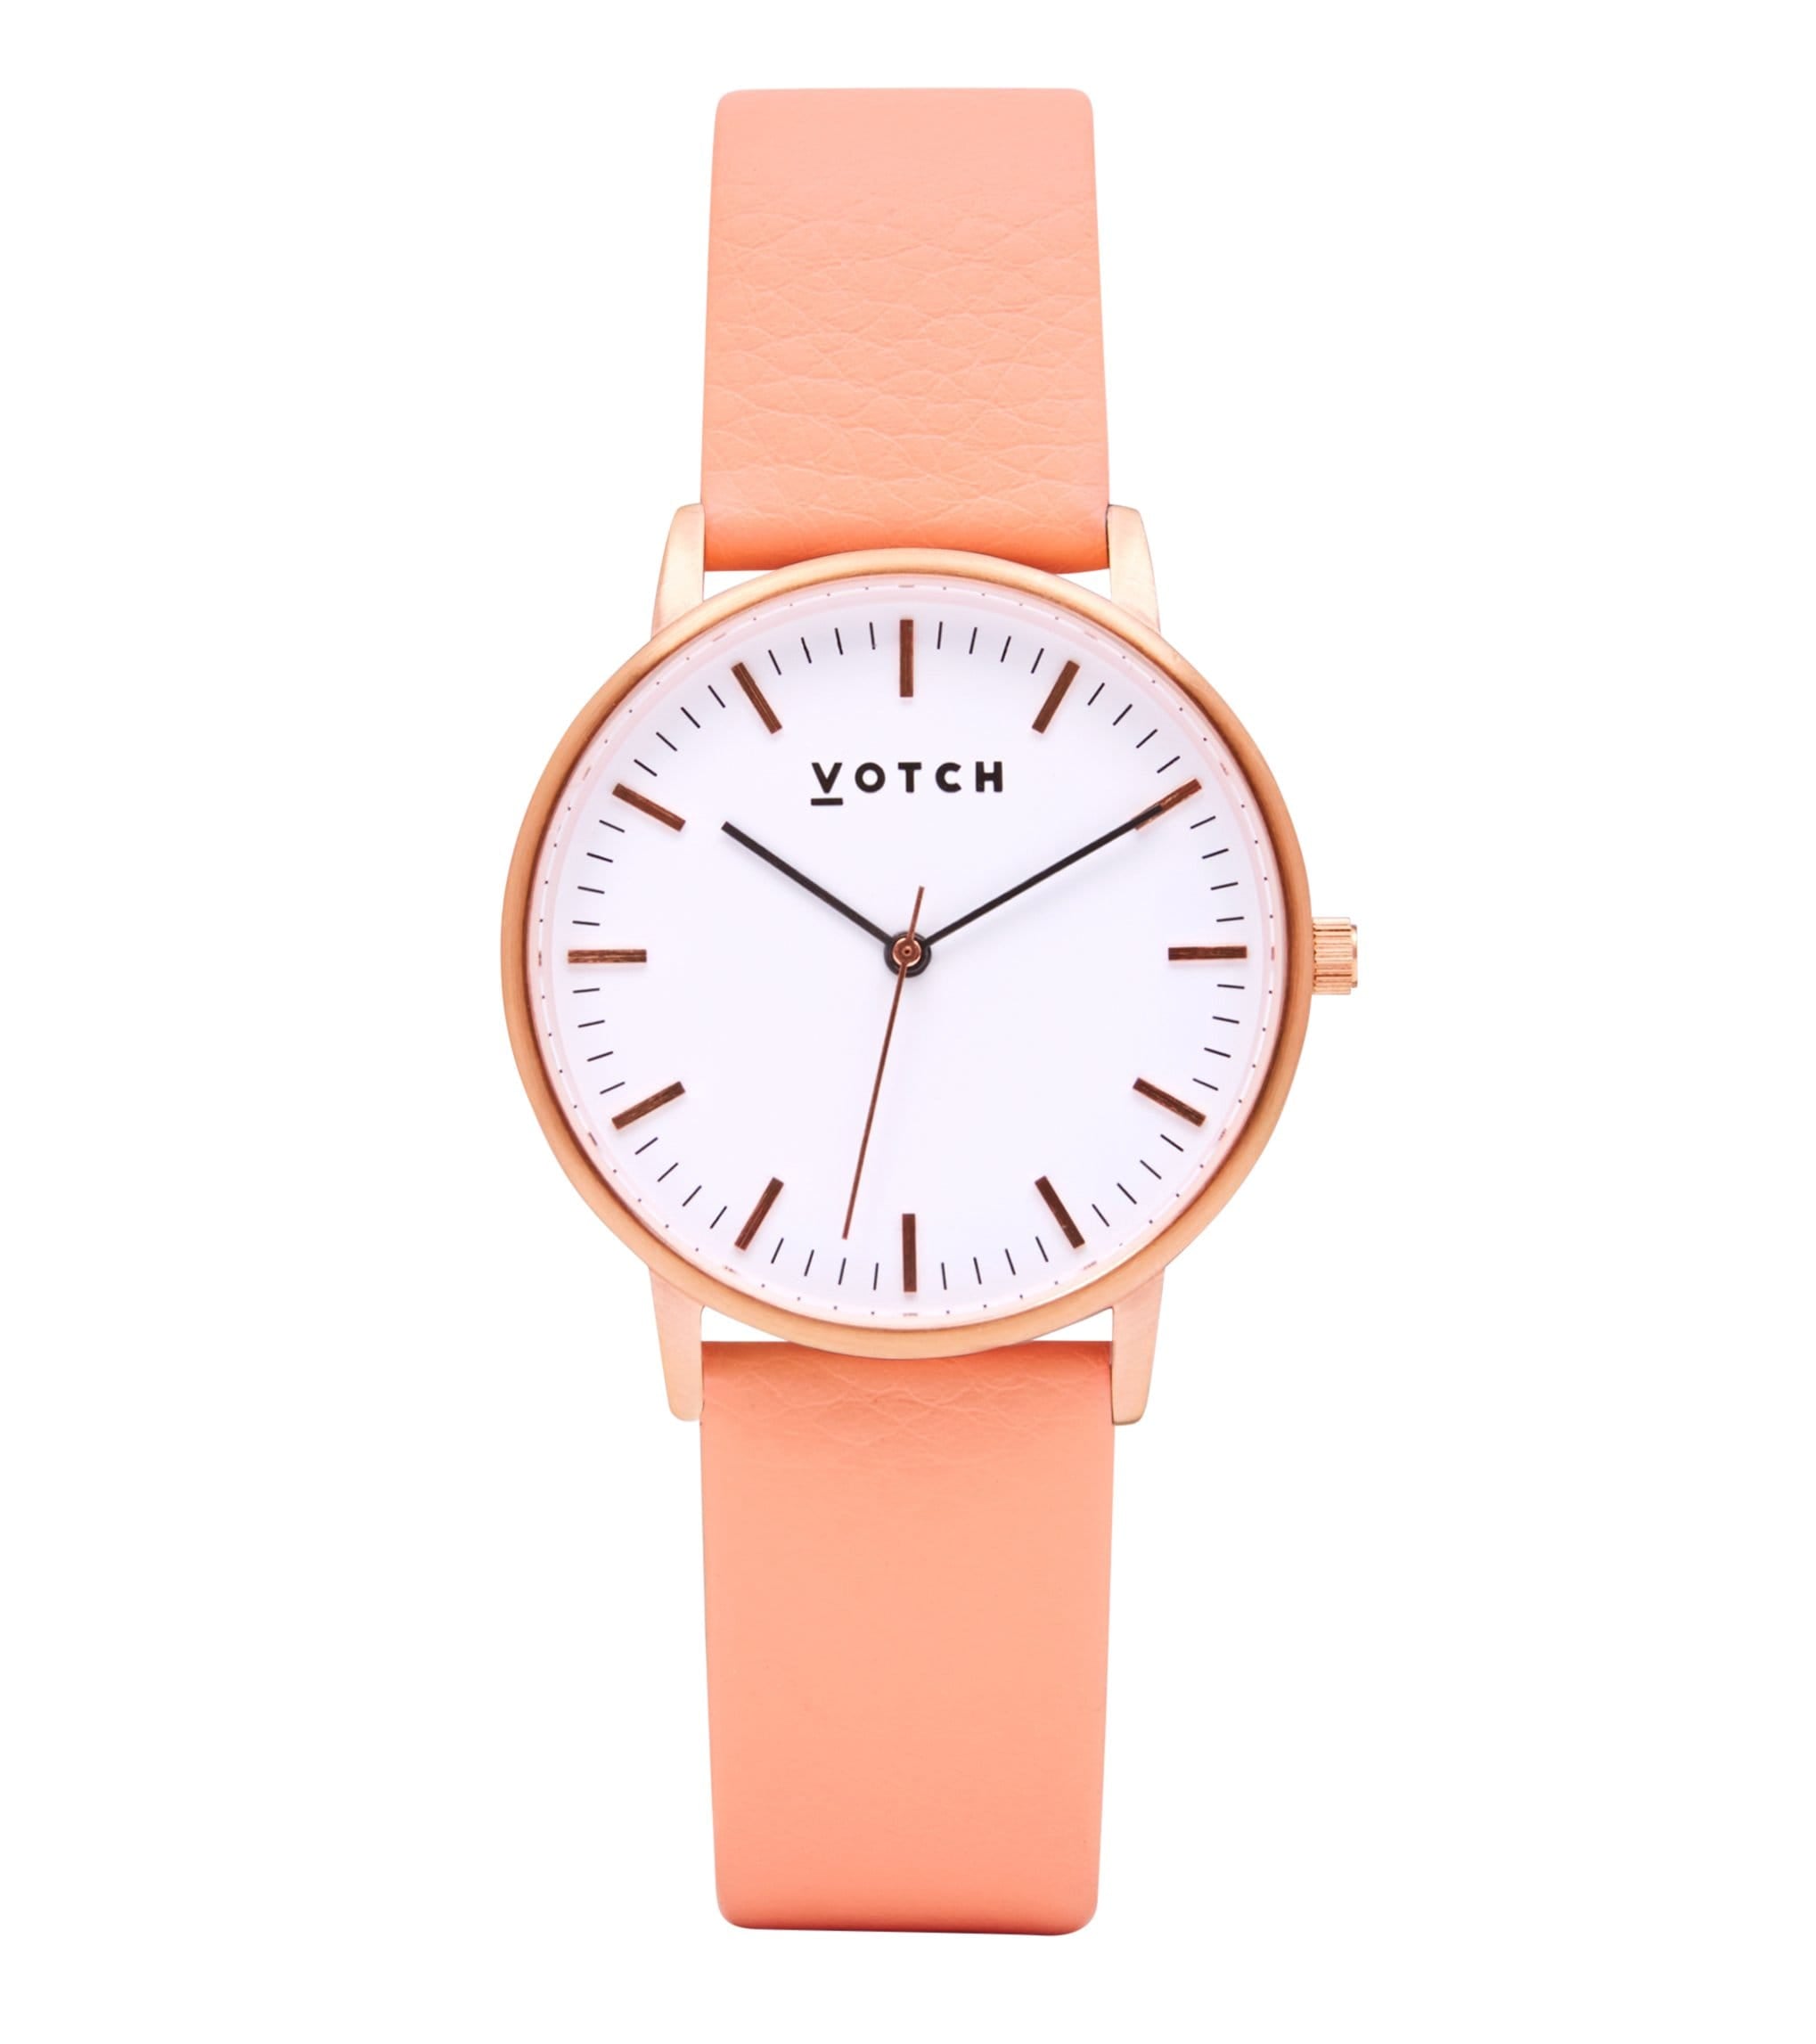 Votch_Watch_RoseGold_Coral_Moment.jpg